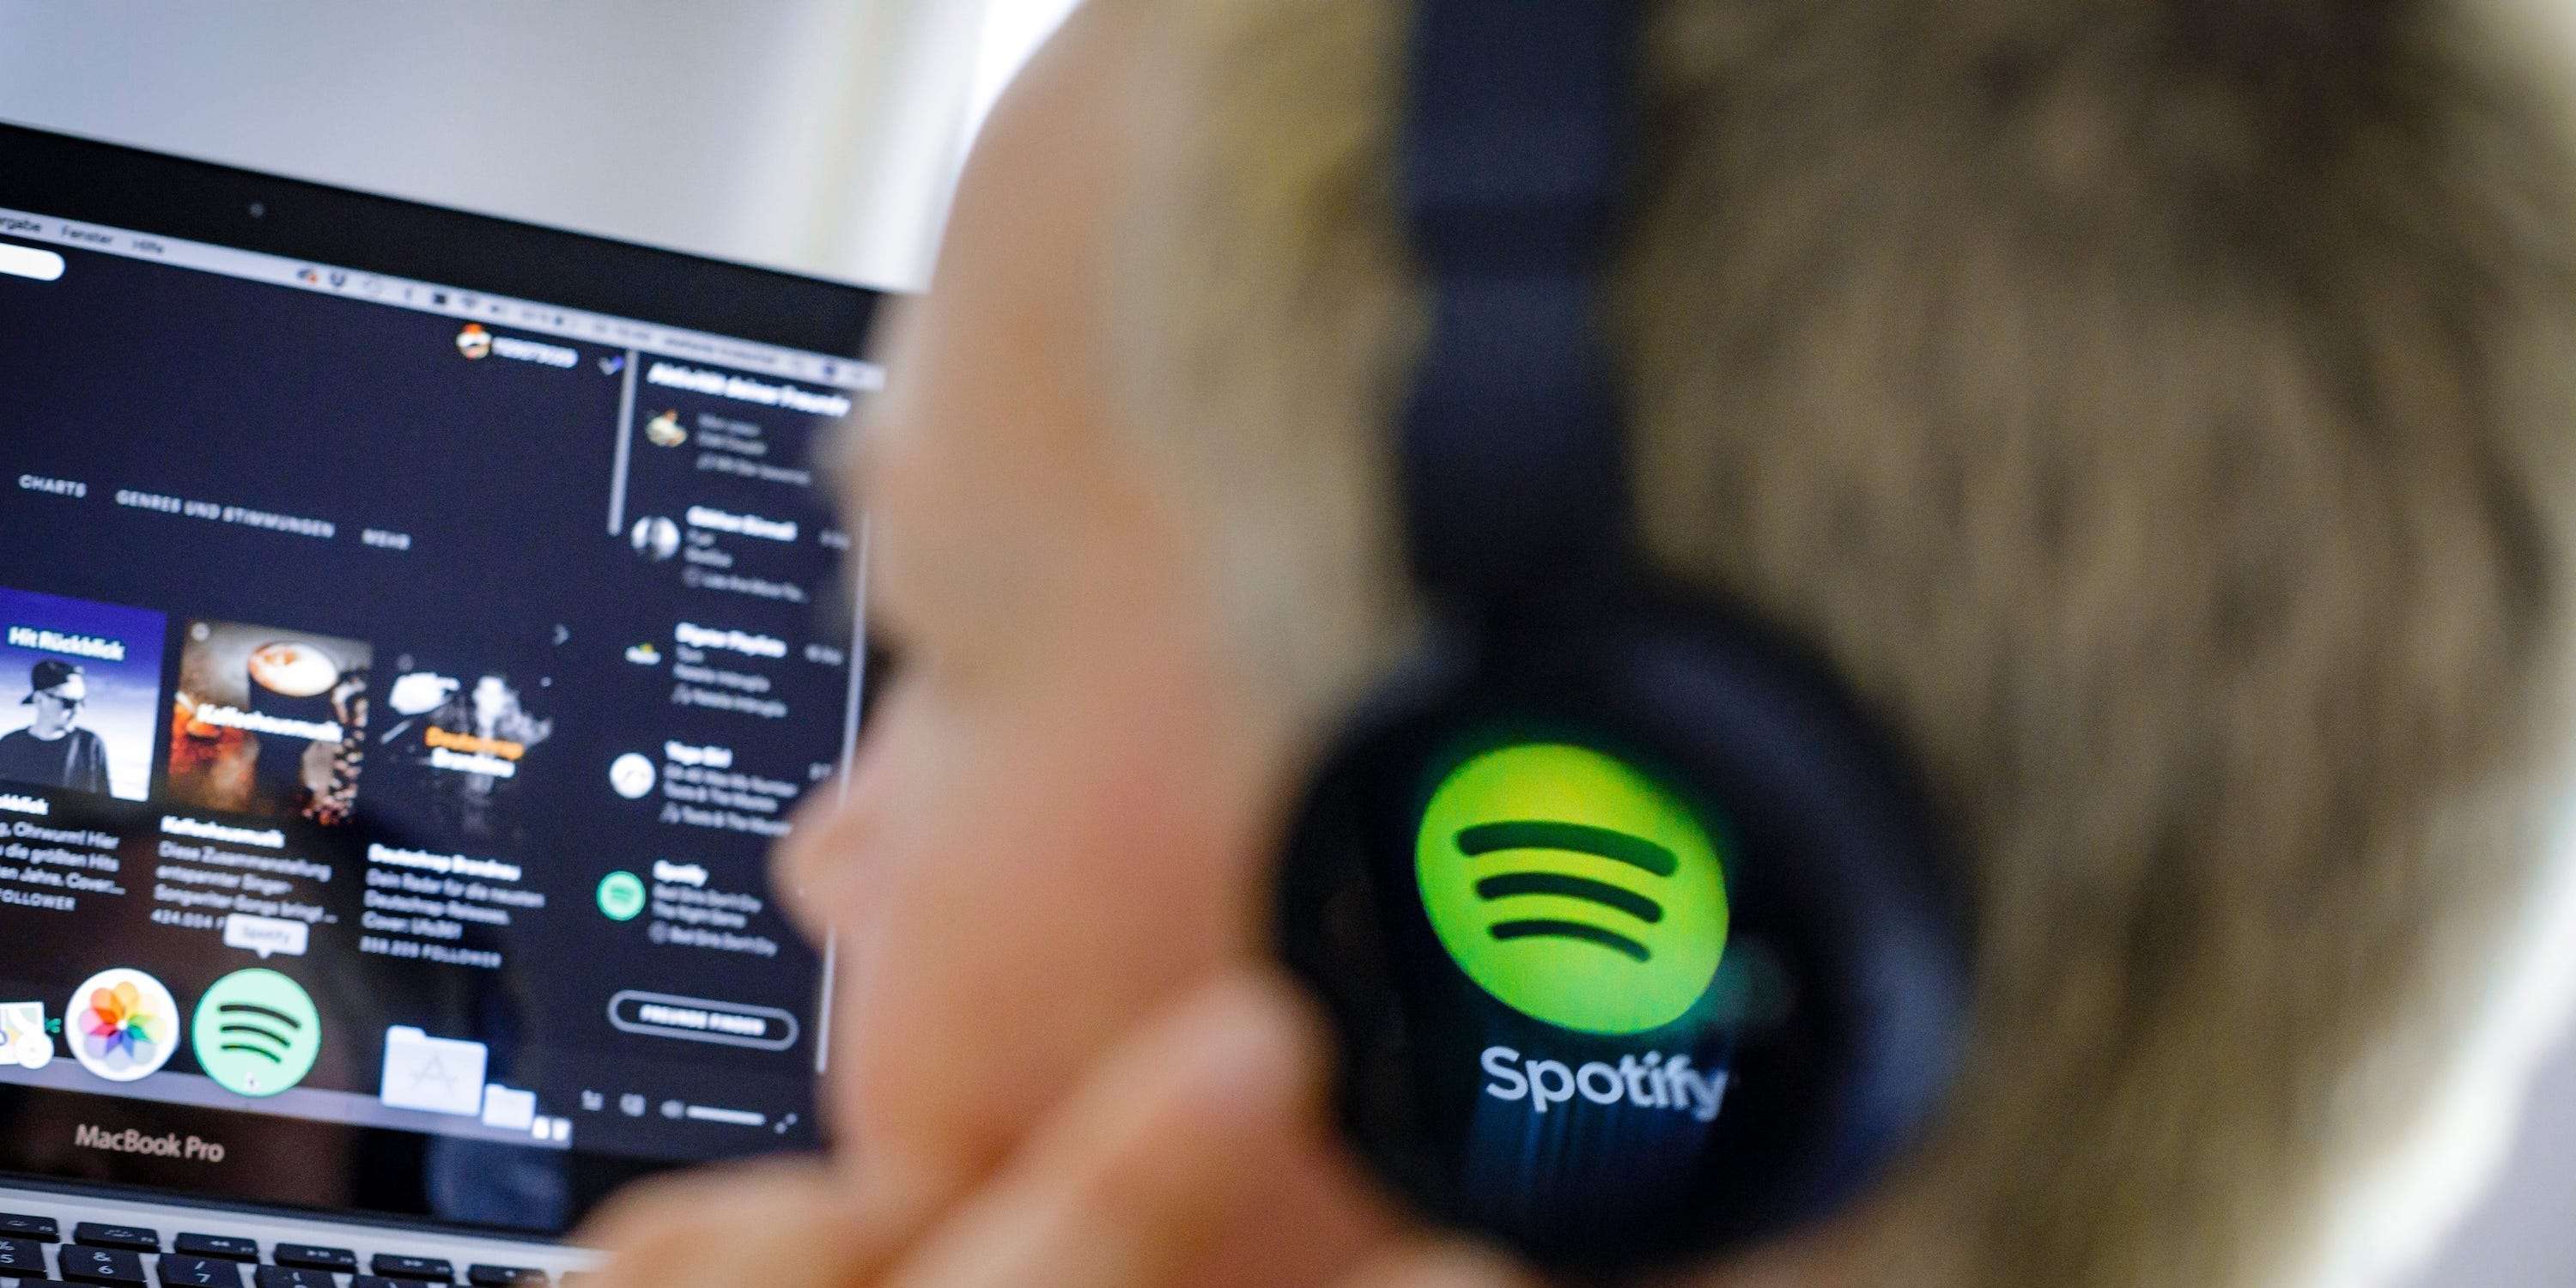 how to open spotify wrapped 2021